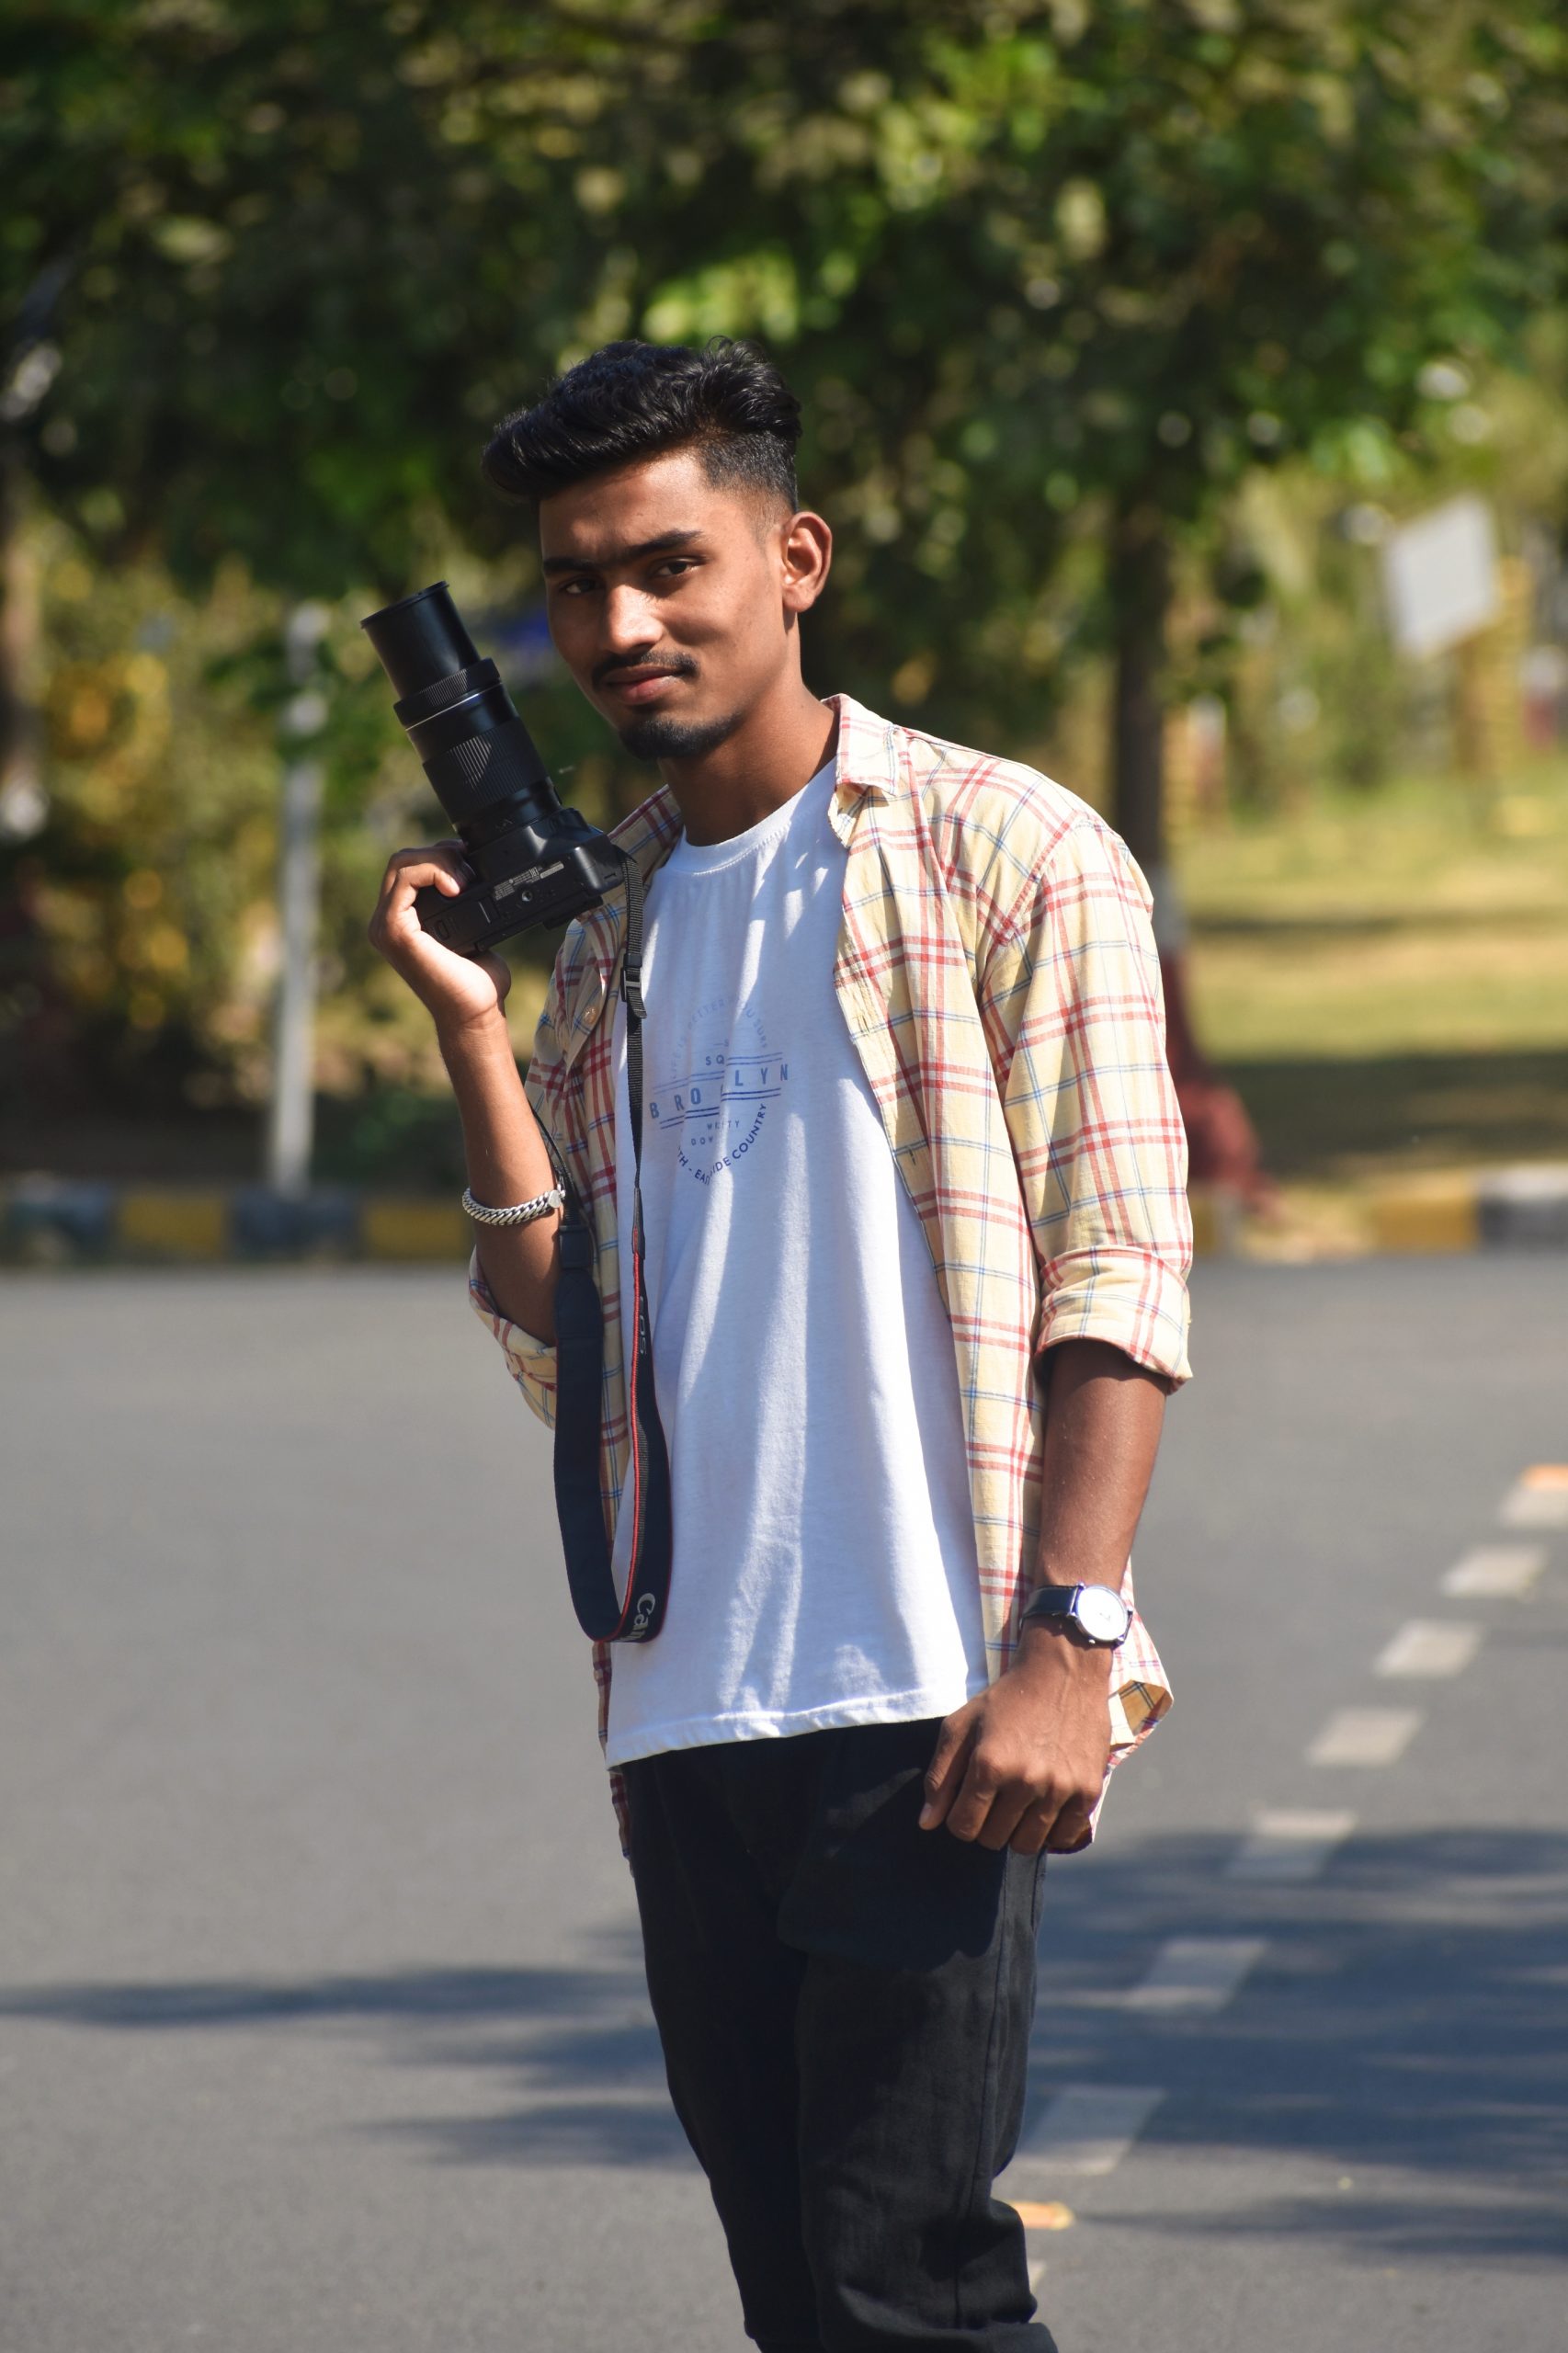 Dslr photography poses